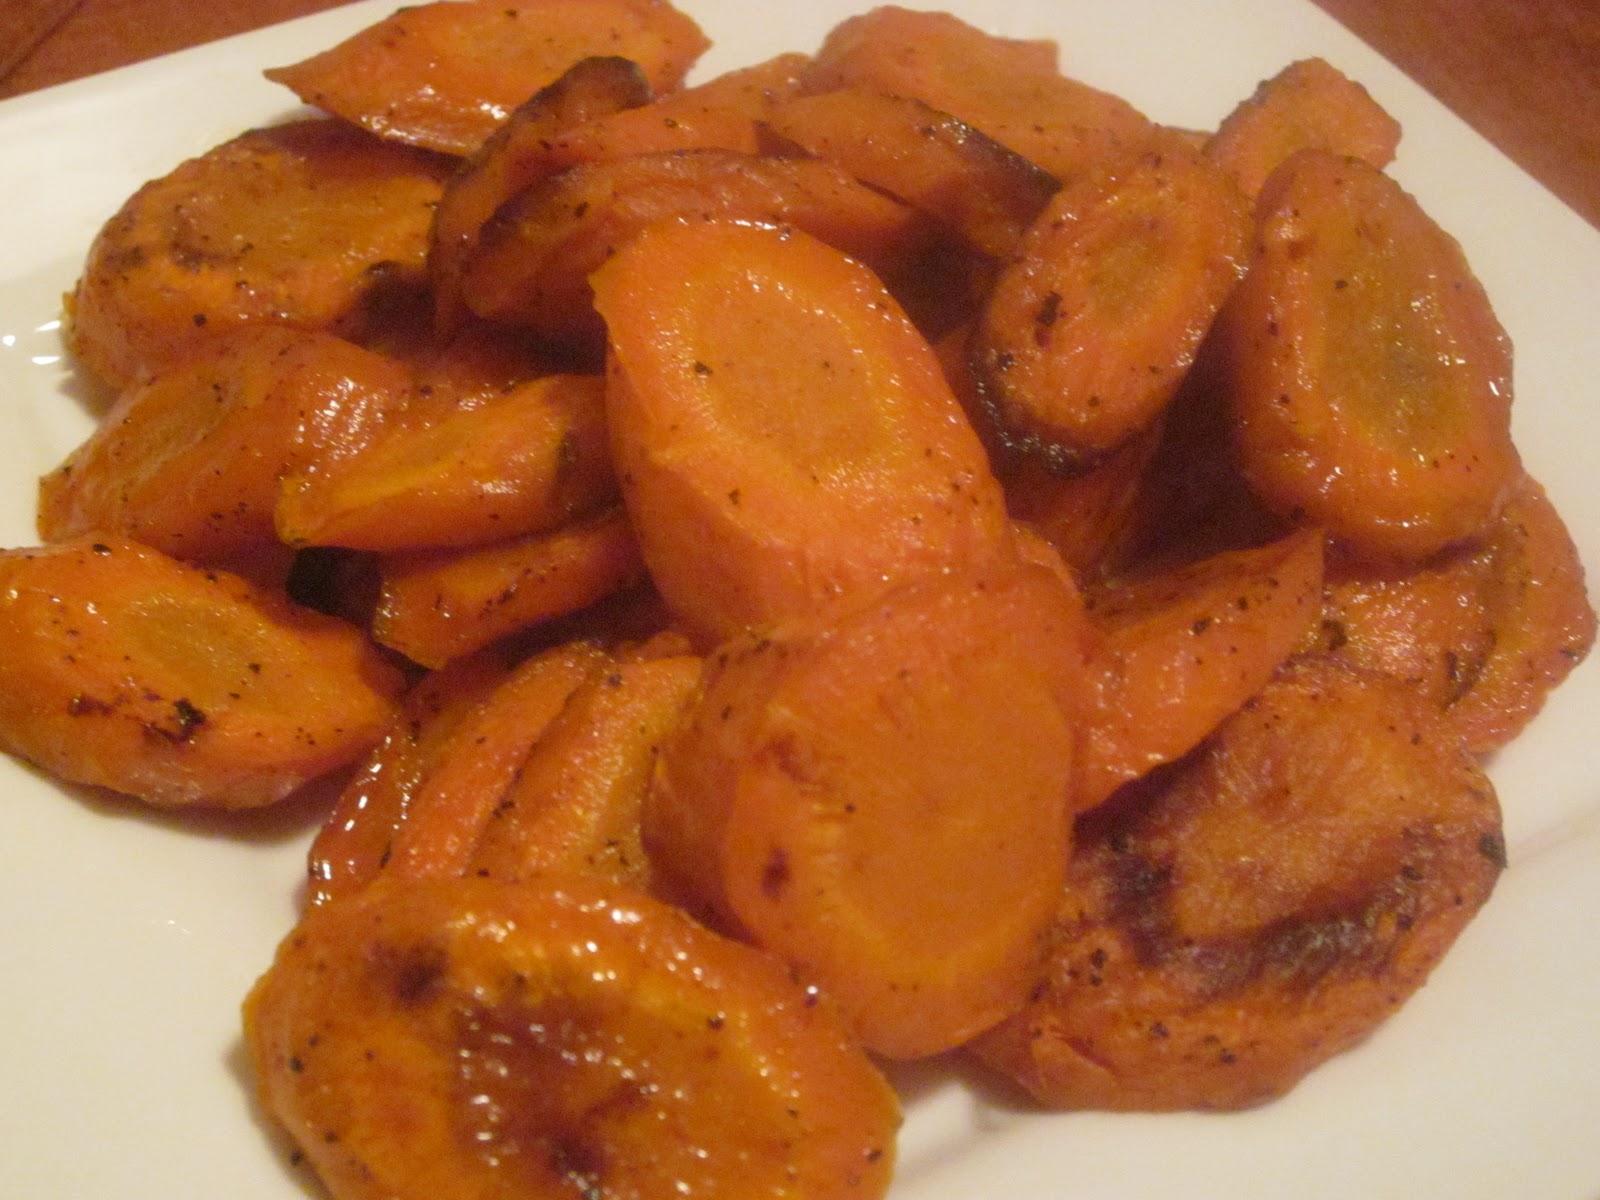 Eat This: Cinnamon Carrot Chips